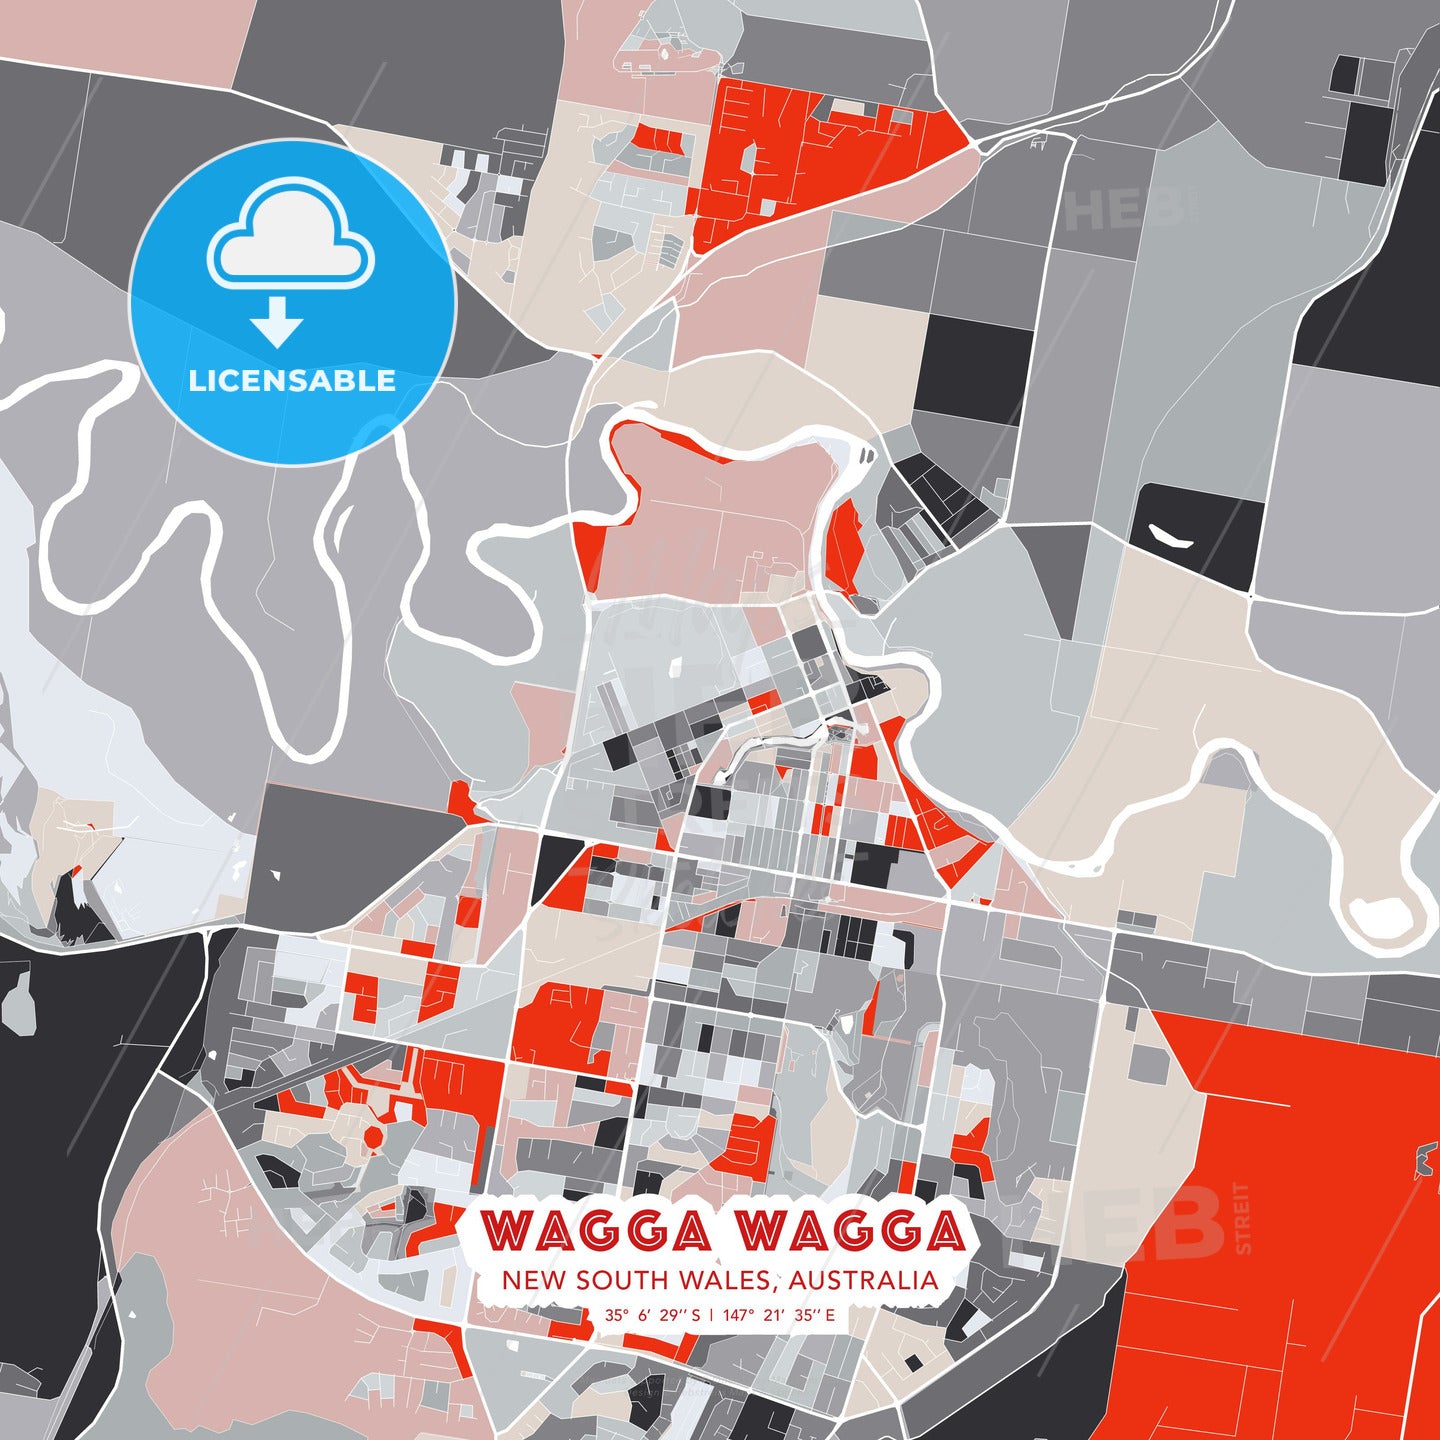 Wagga Wagga, New South Wales, Australia, modern map - HEBSTREITS Sketches